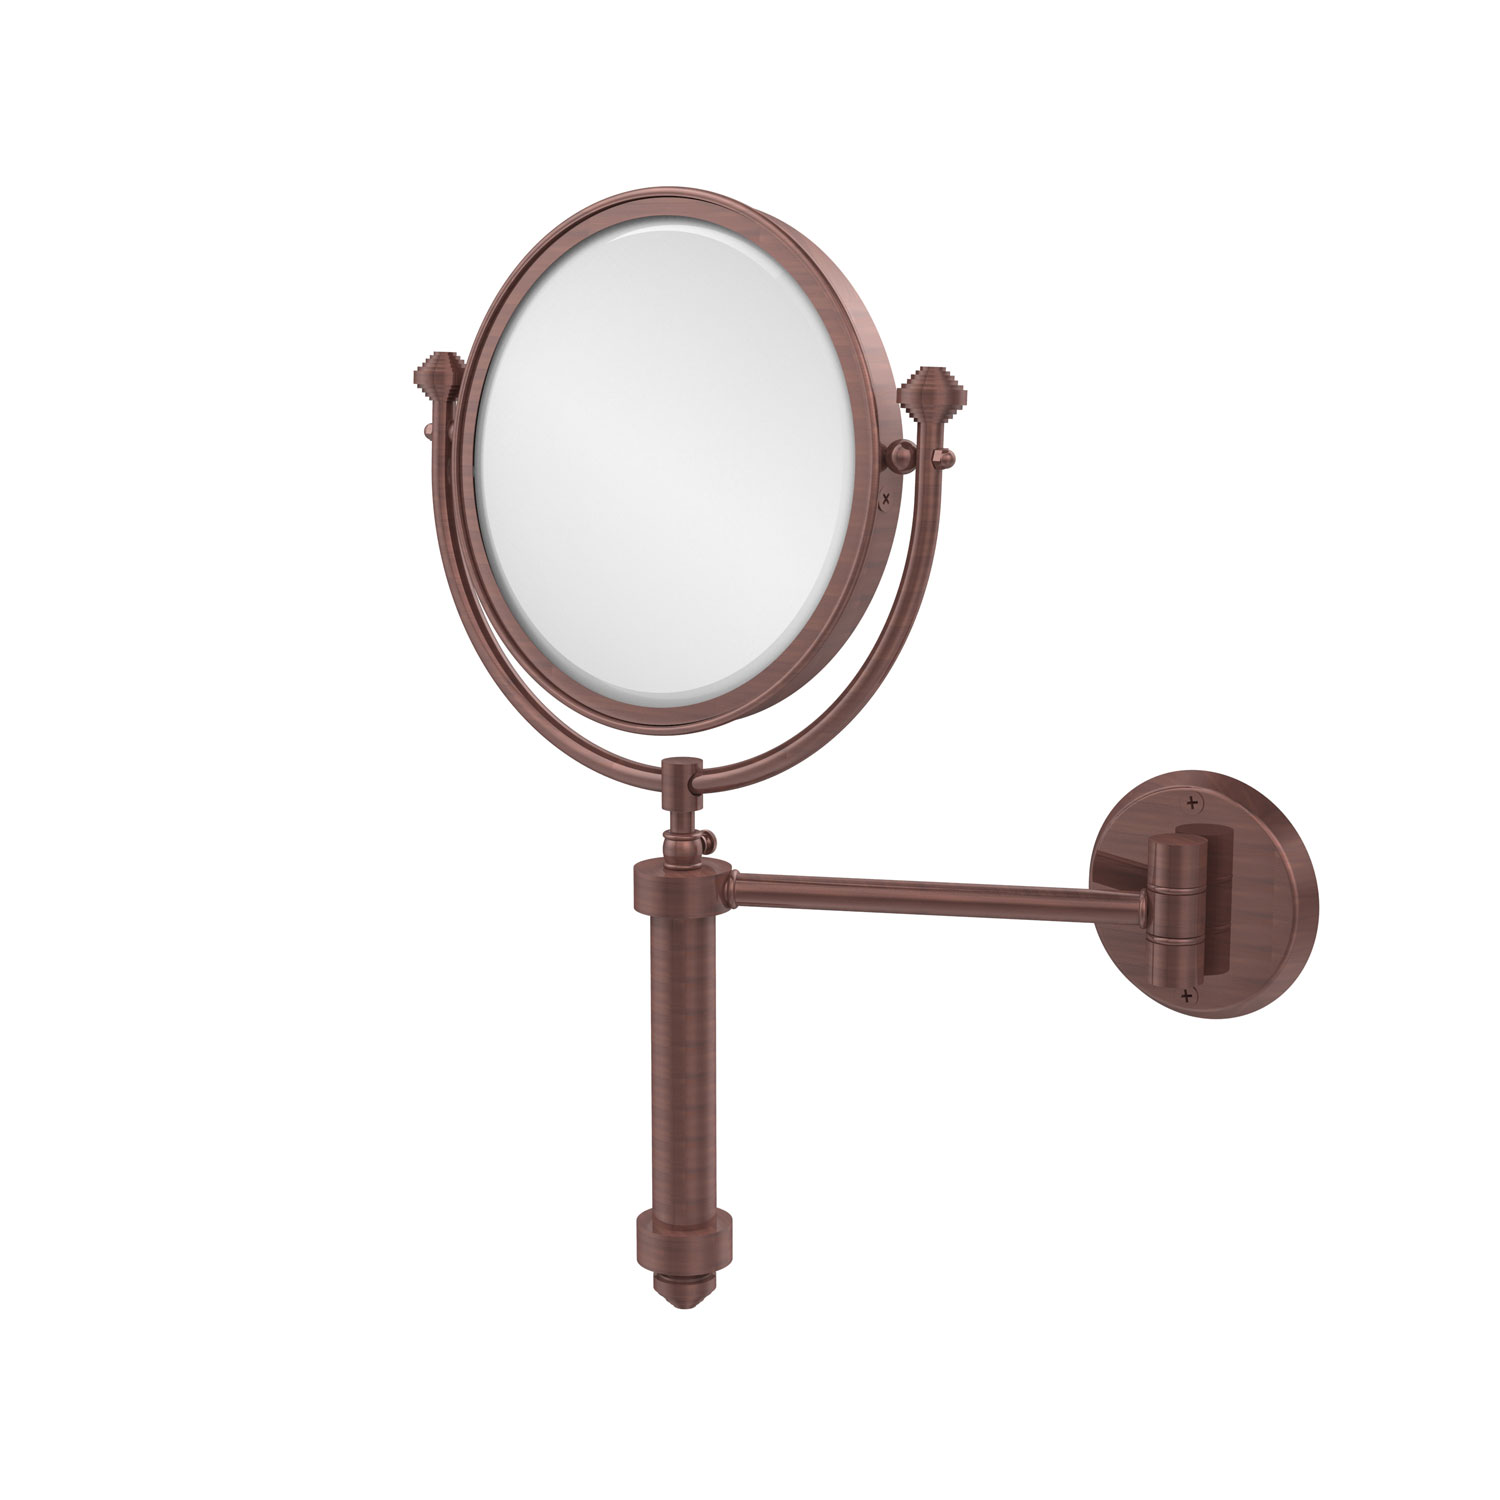 Southbeach Collection Wall Mounted Make-Up Mirror 8 Inch Diameter With 4X Magnification, Antique Copper